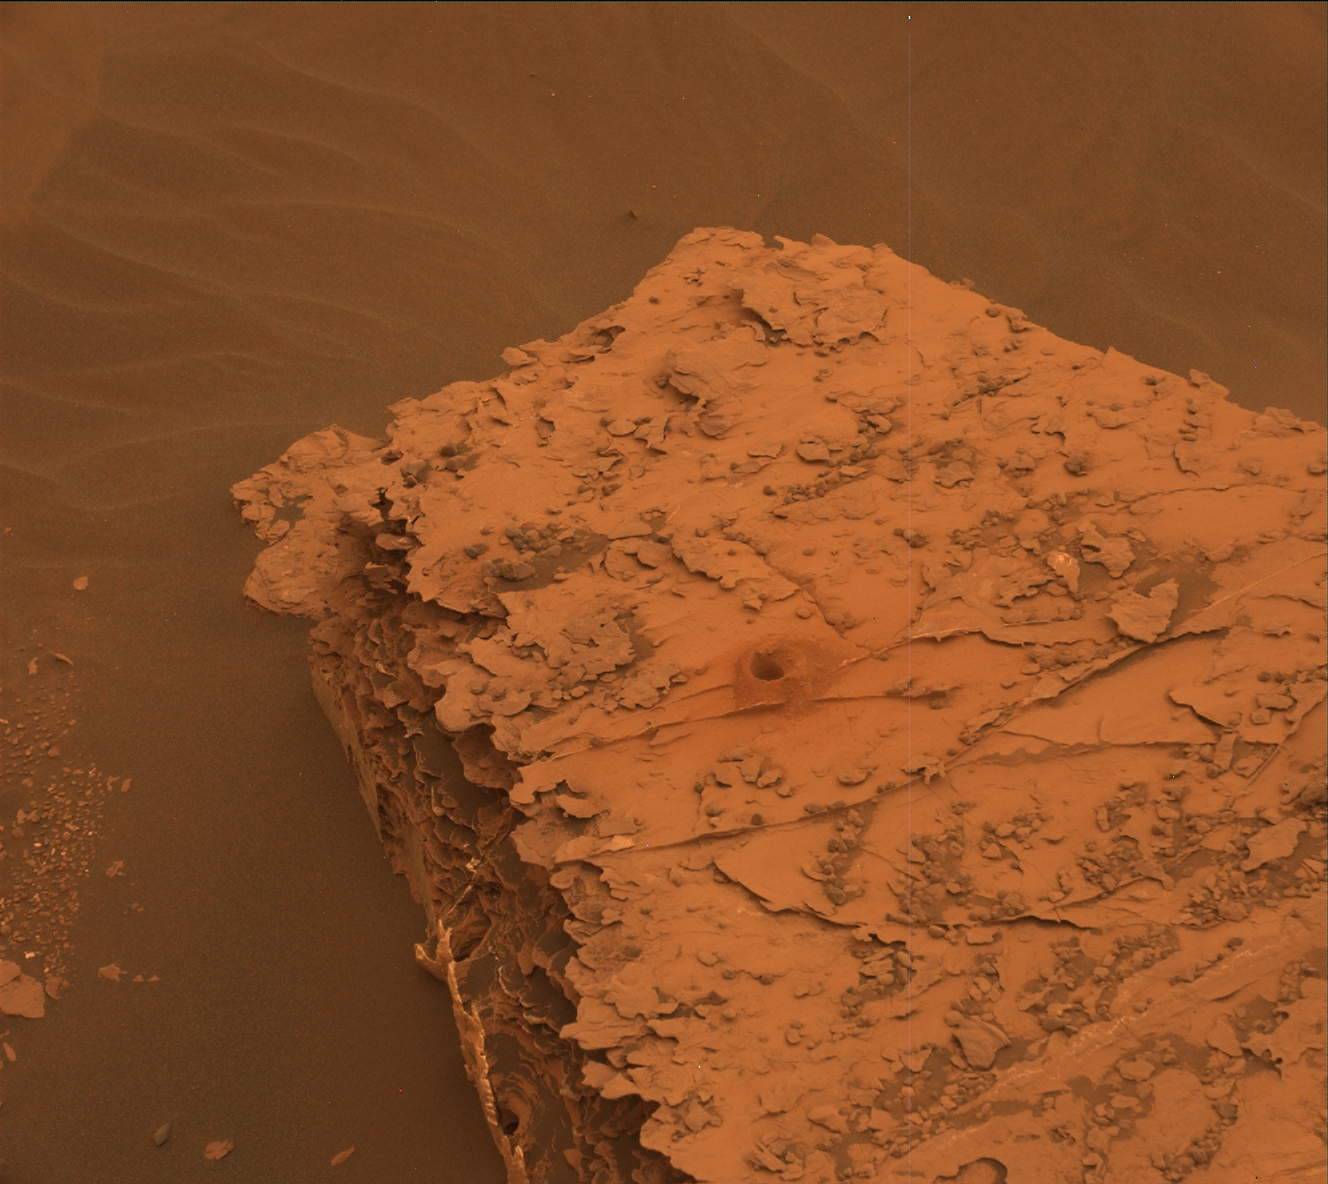 Sols 2088-2089: A Dusty Day on Mars